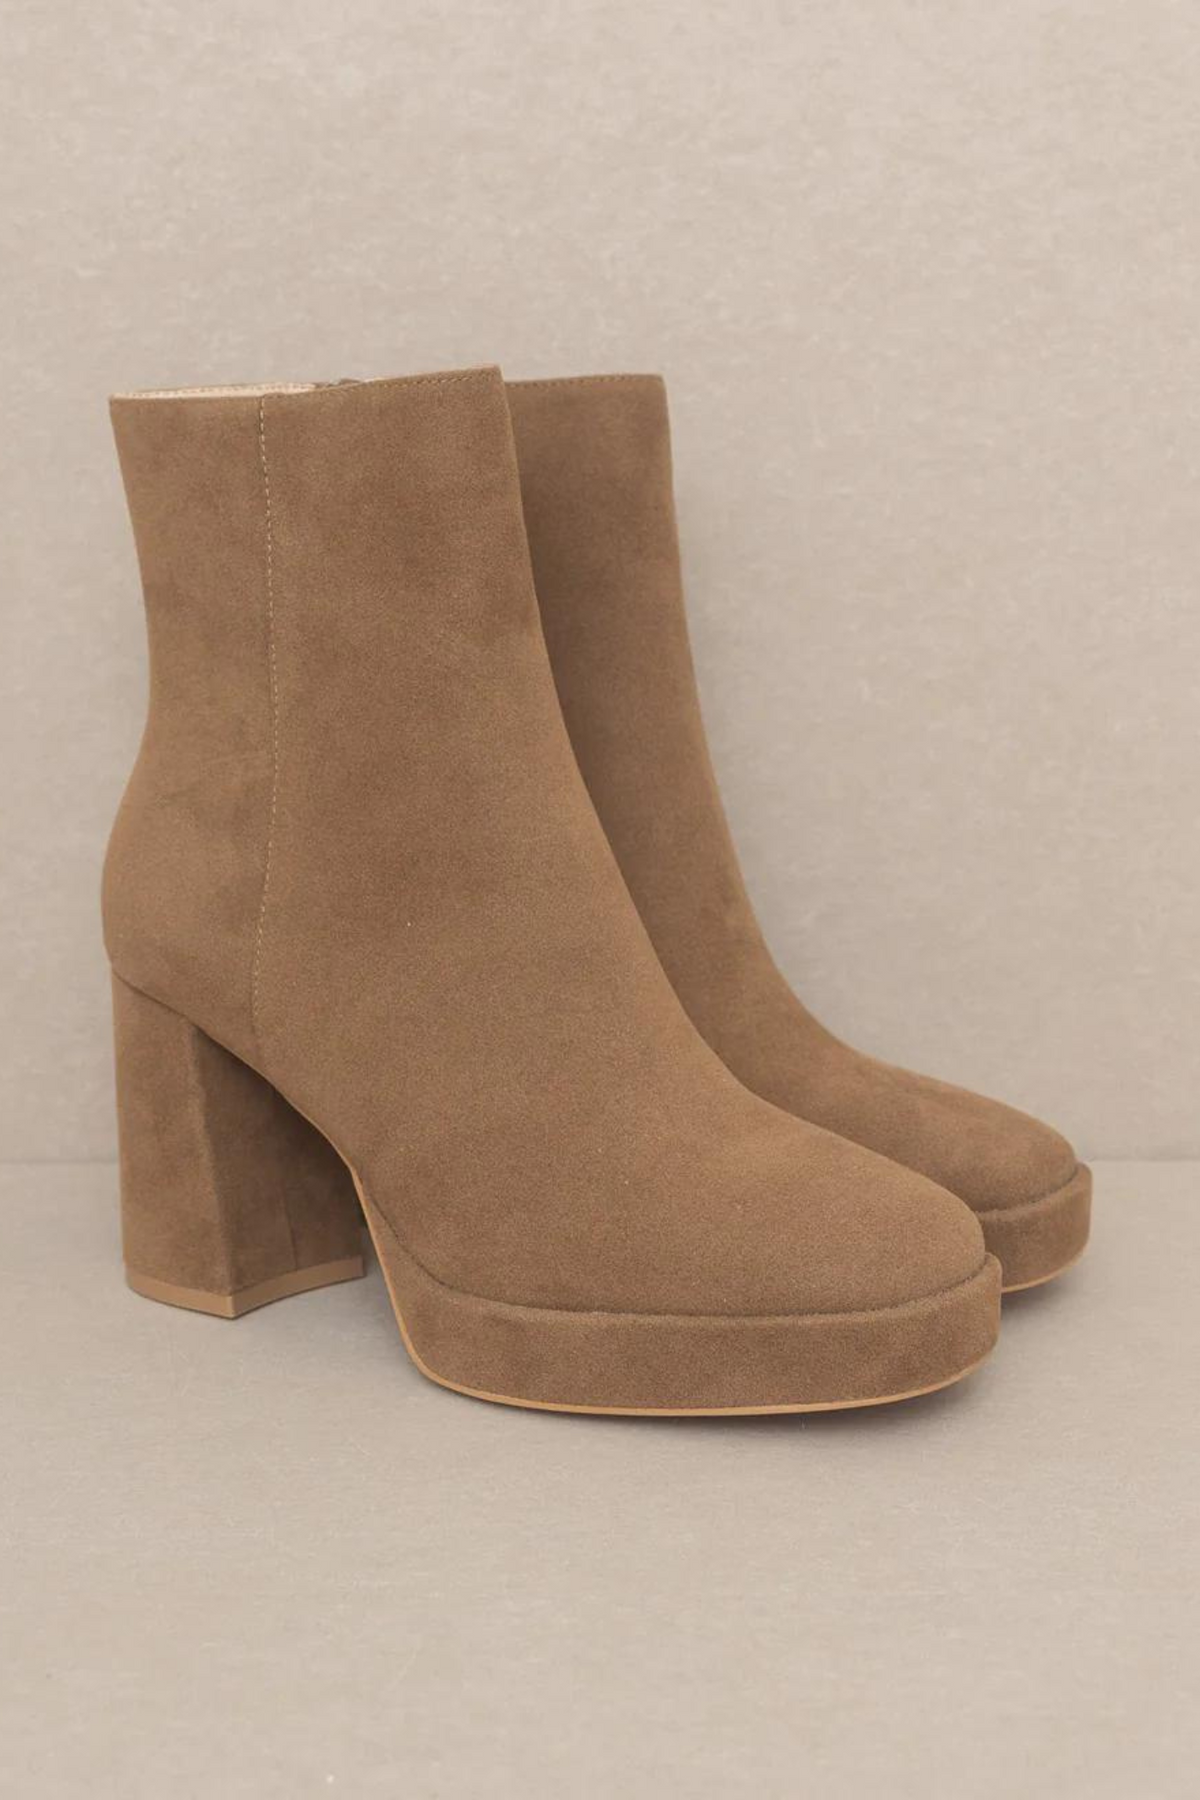 Oasis Society | Lima Platform Boots Brown | Sweetest Stitch Online